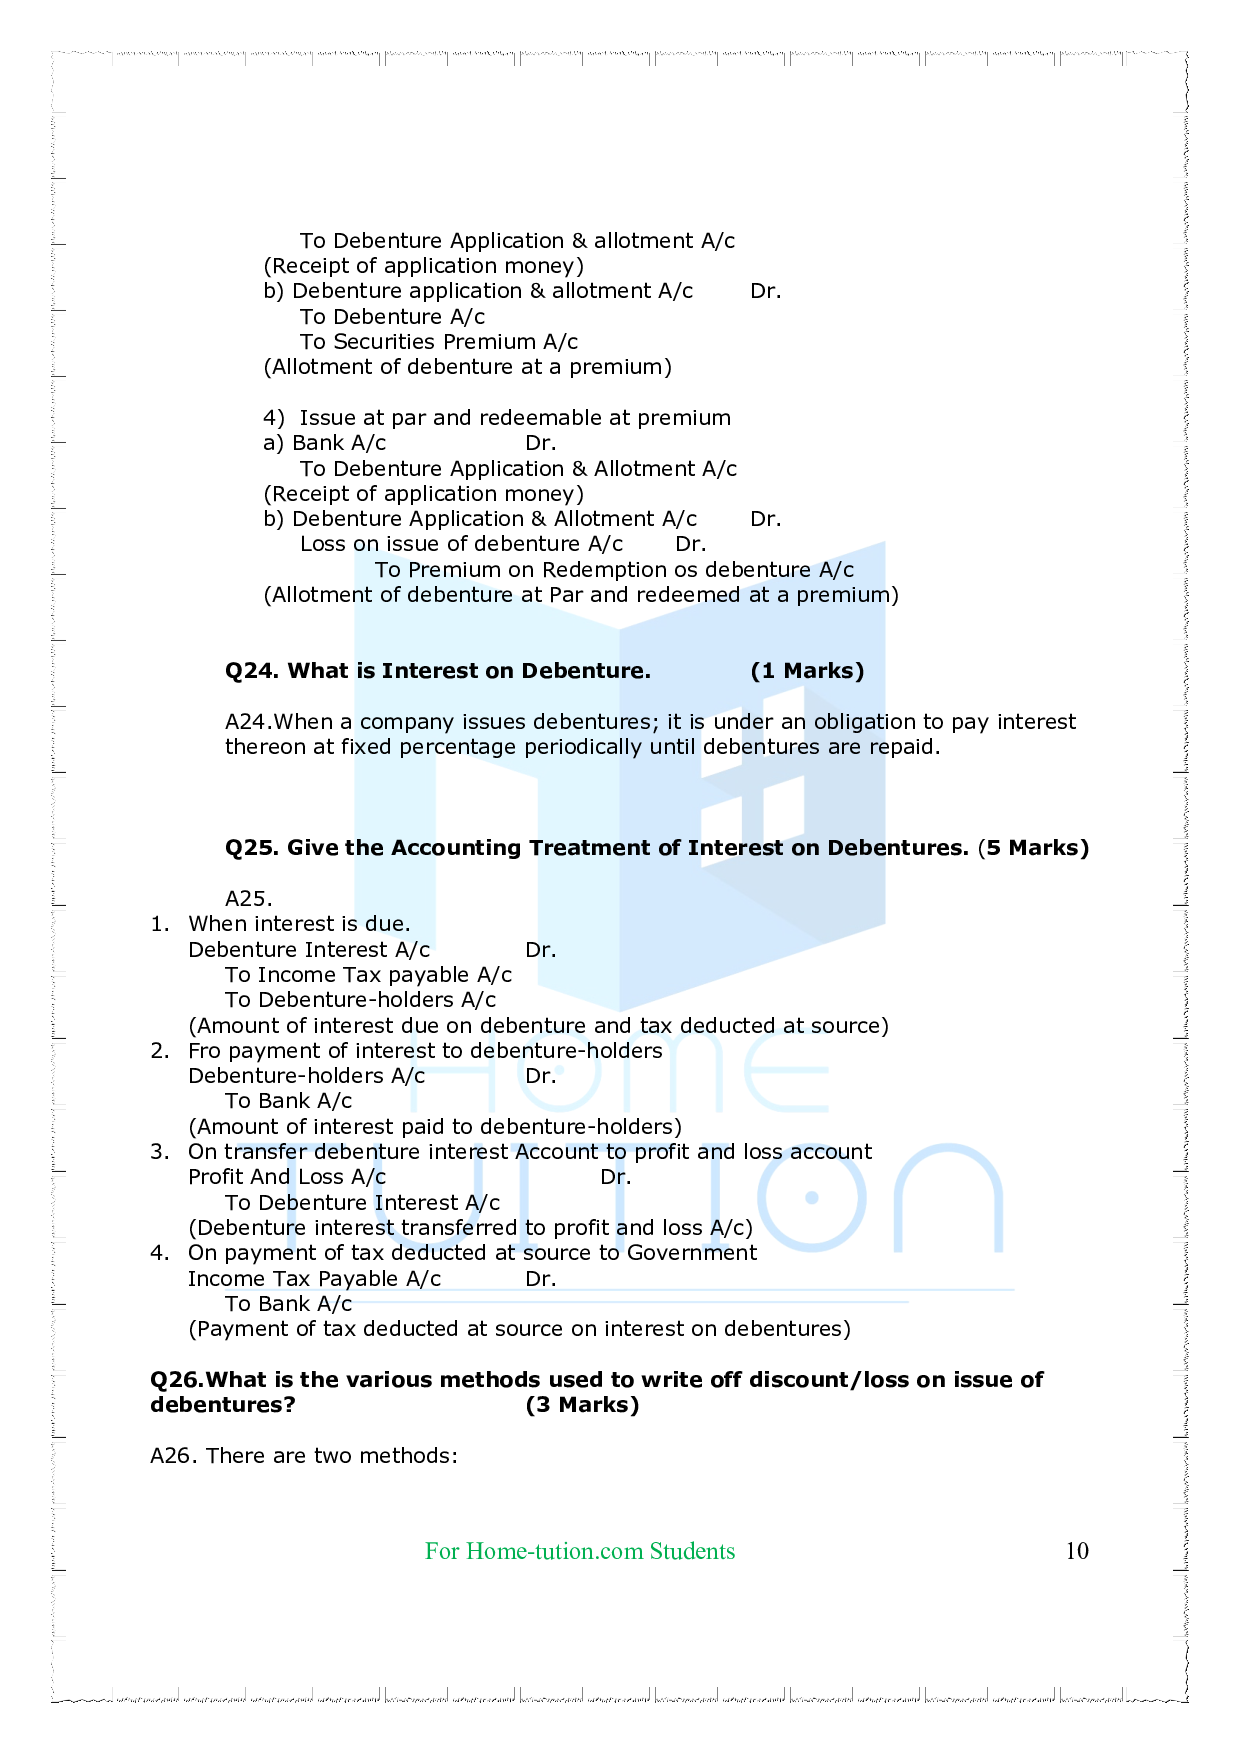 Chapter-Chapter 7 Issue and Redemption of Debentures Questions